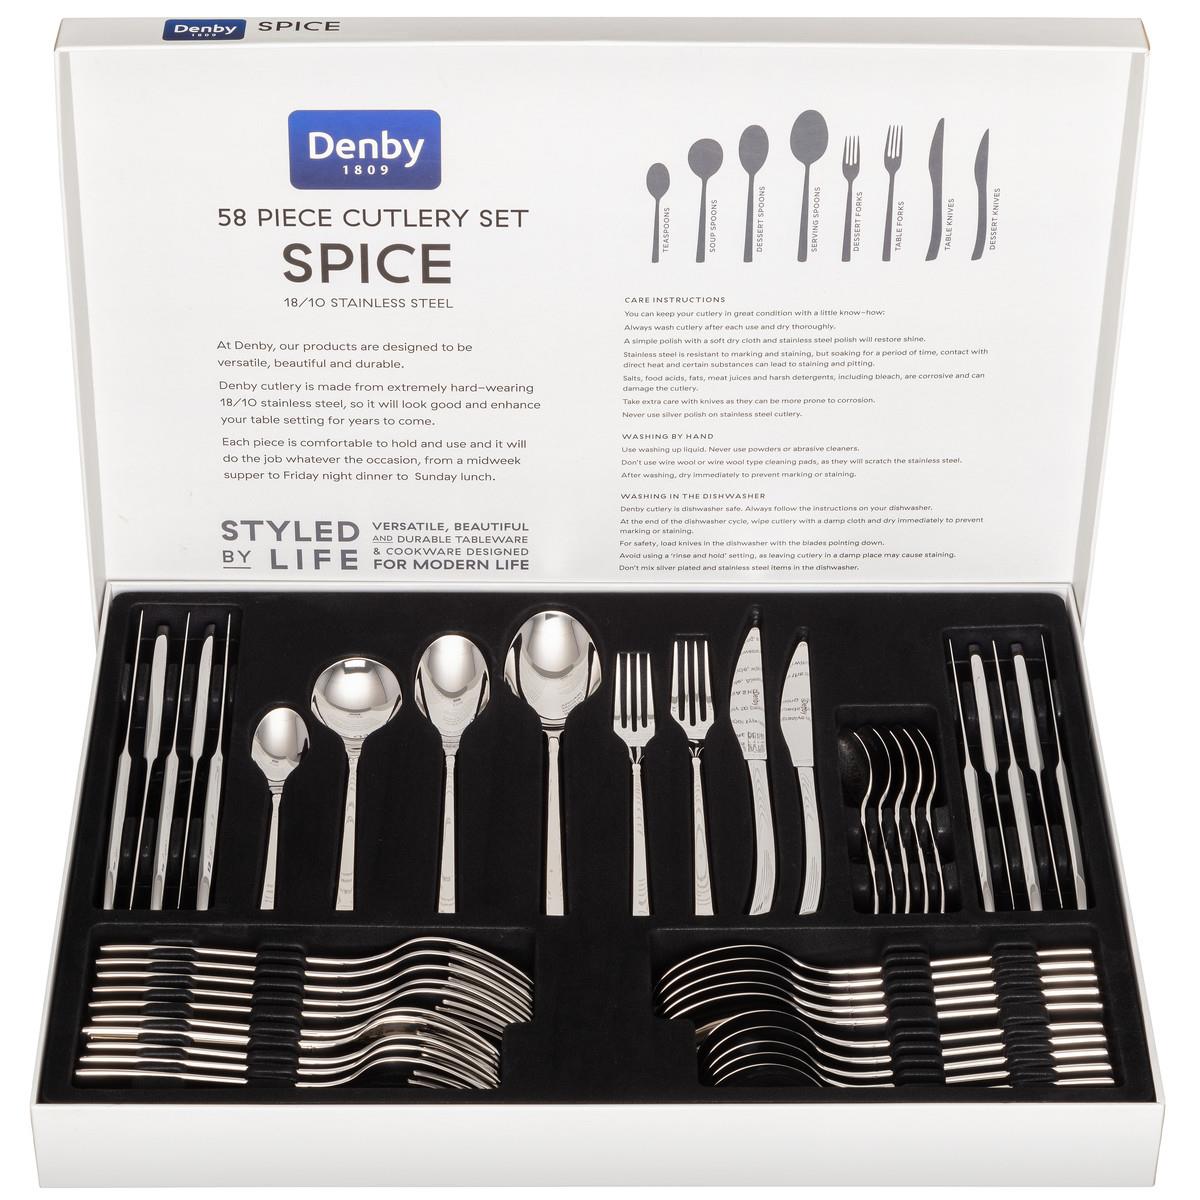 Denby Spice 58 Piece Cutlery Set Questions & Answers